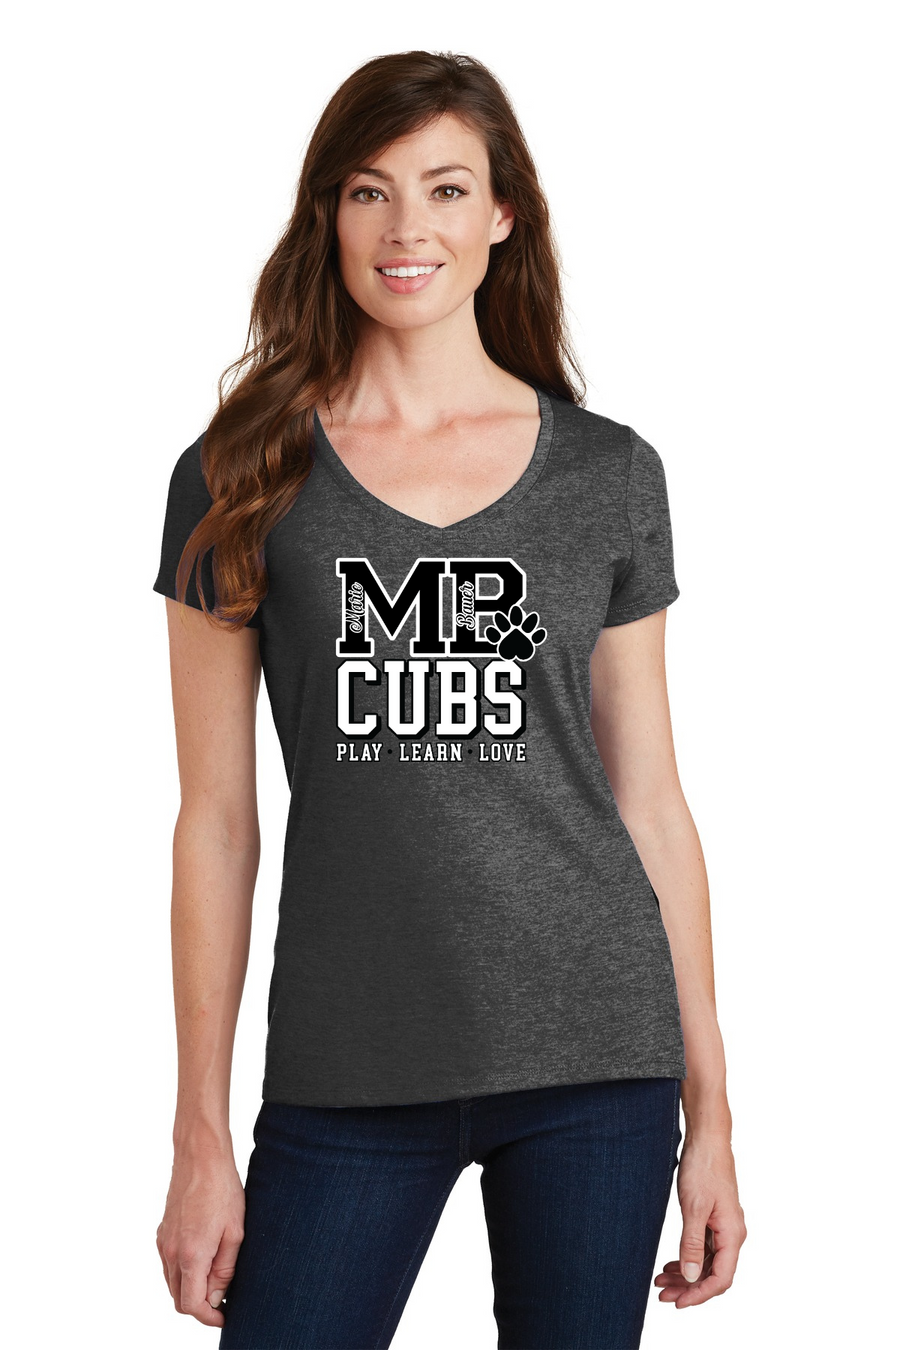 Marie Bauer Early Education Spirit Wear 23-24 On-Demand-Port and Co Ladies V-Neck MB Cubs Logo